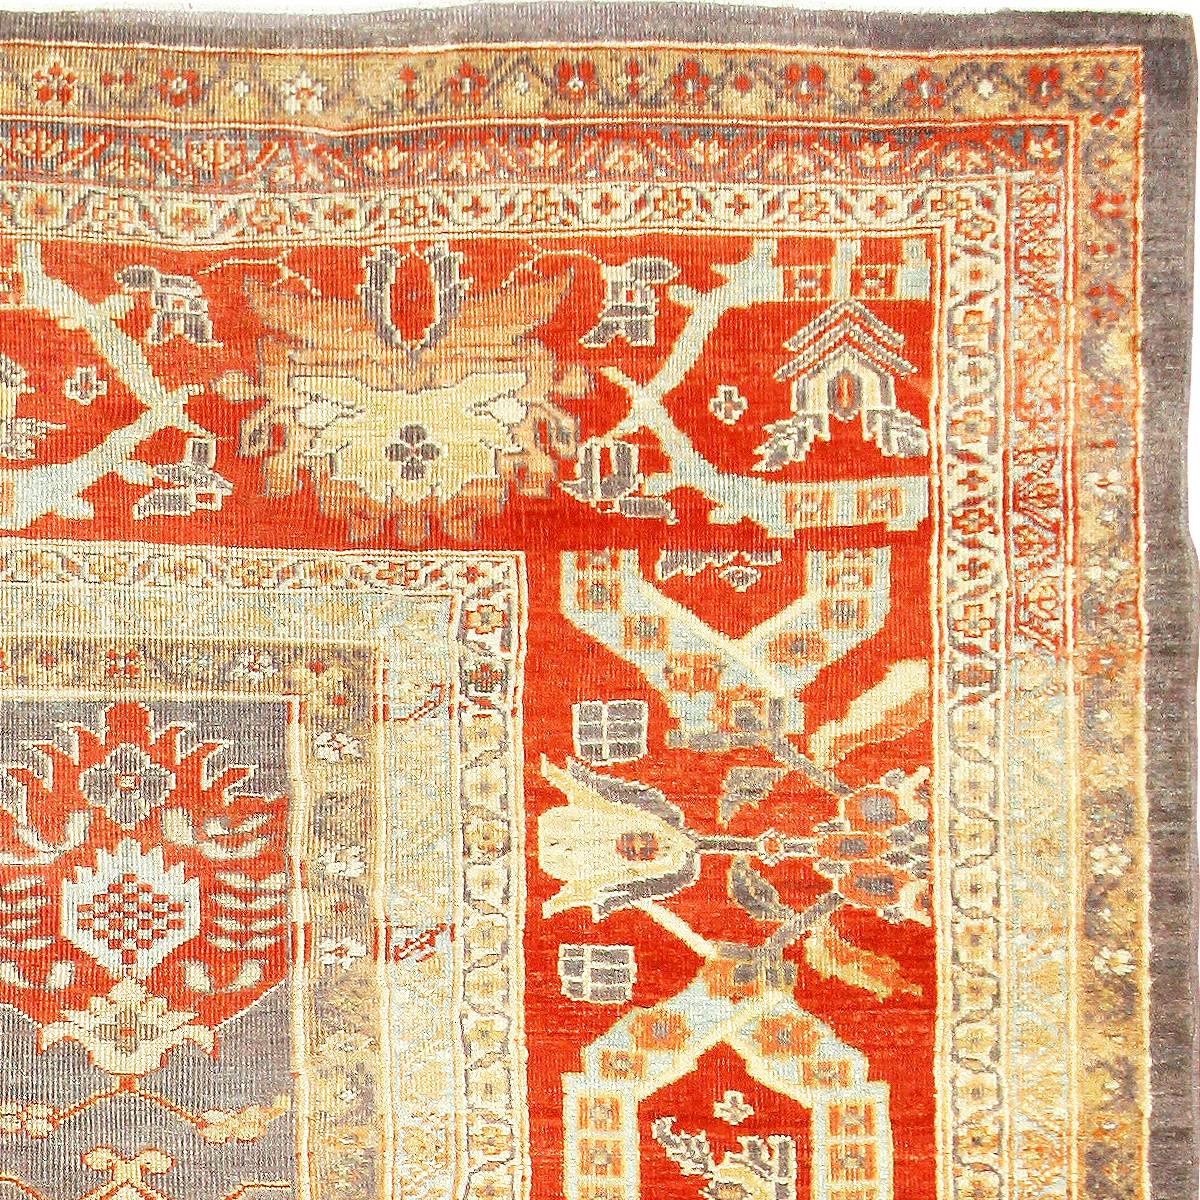 The city of Sultanabad (which is now known as Arak) was founded, in the early 1800s, as a center for commercial rug production in Iran. During the late 19th century, the firm of Hotz and Son and Ziegler and Co. established a manufactory in